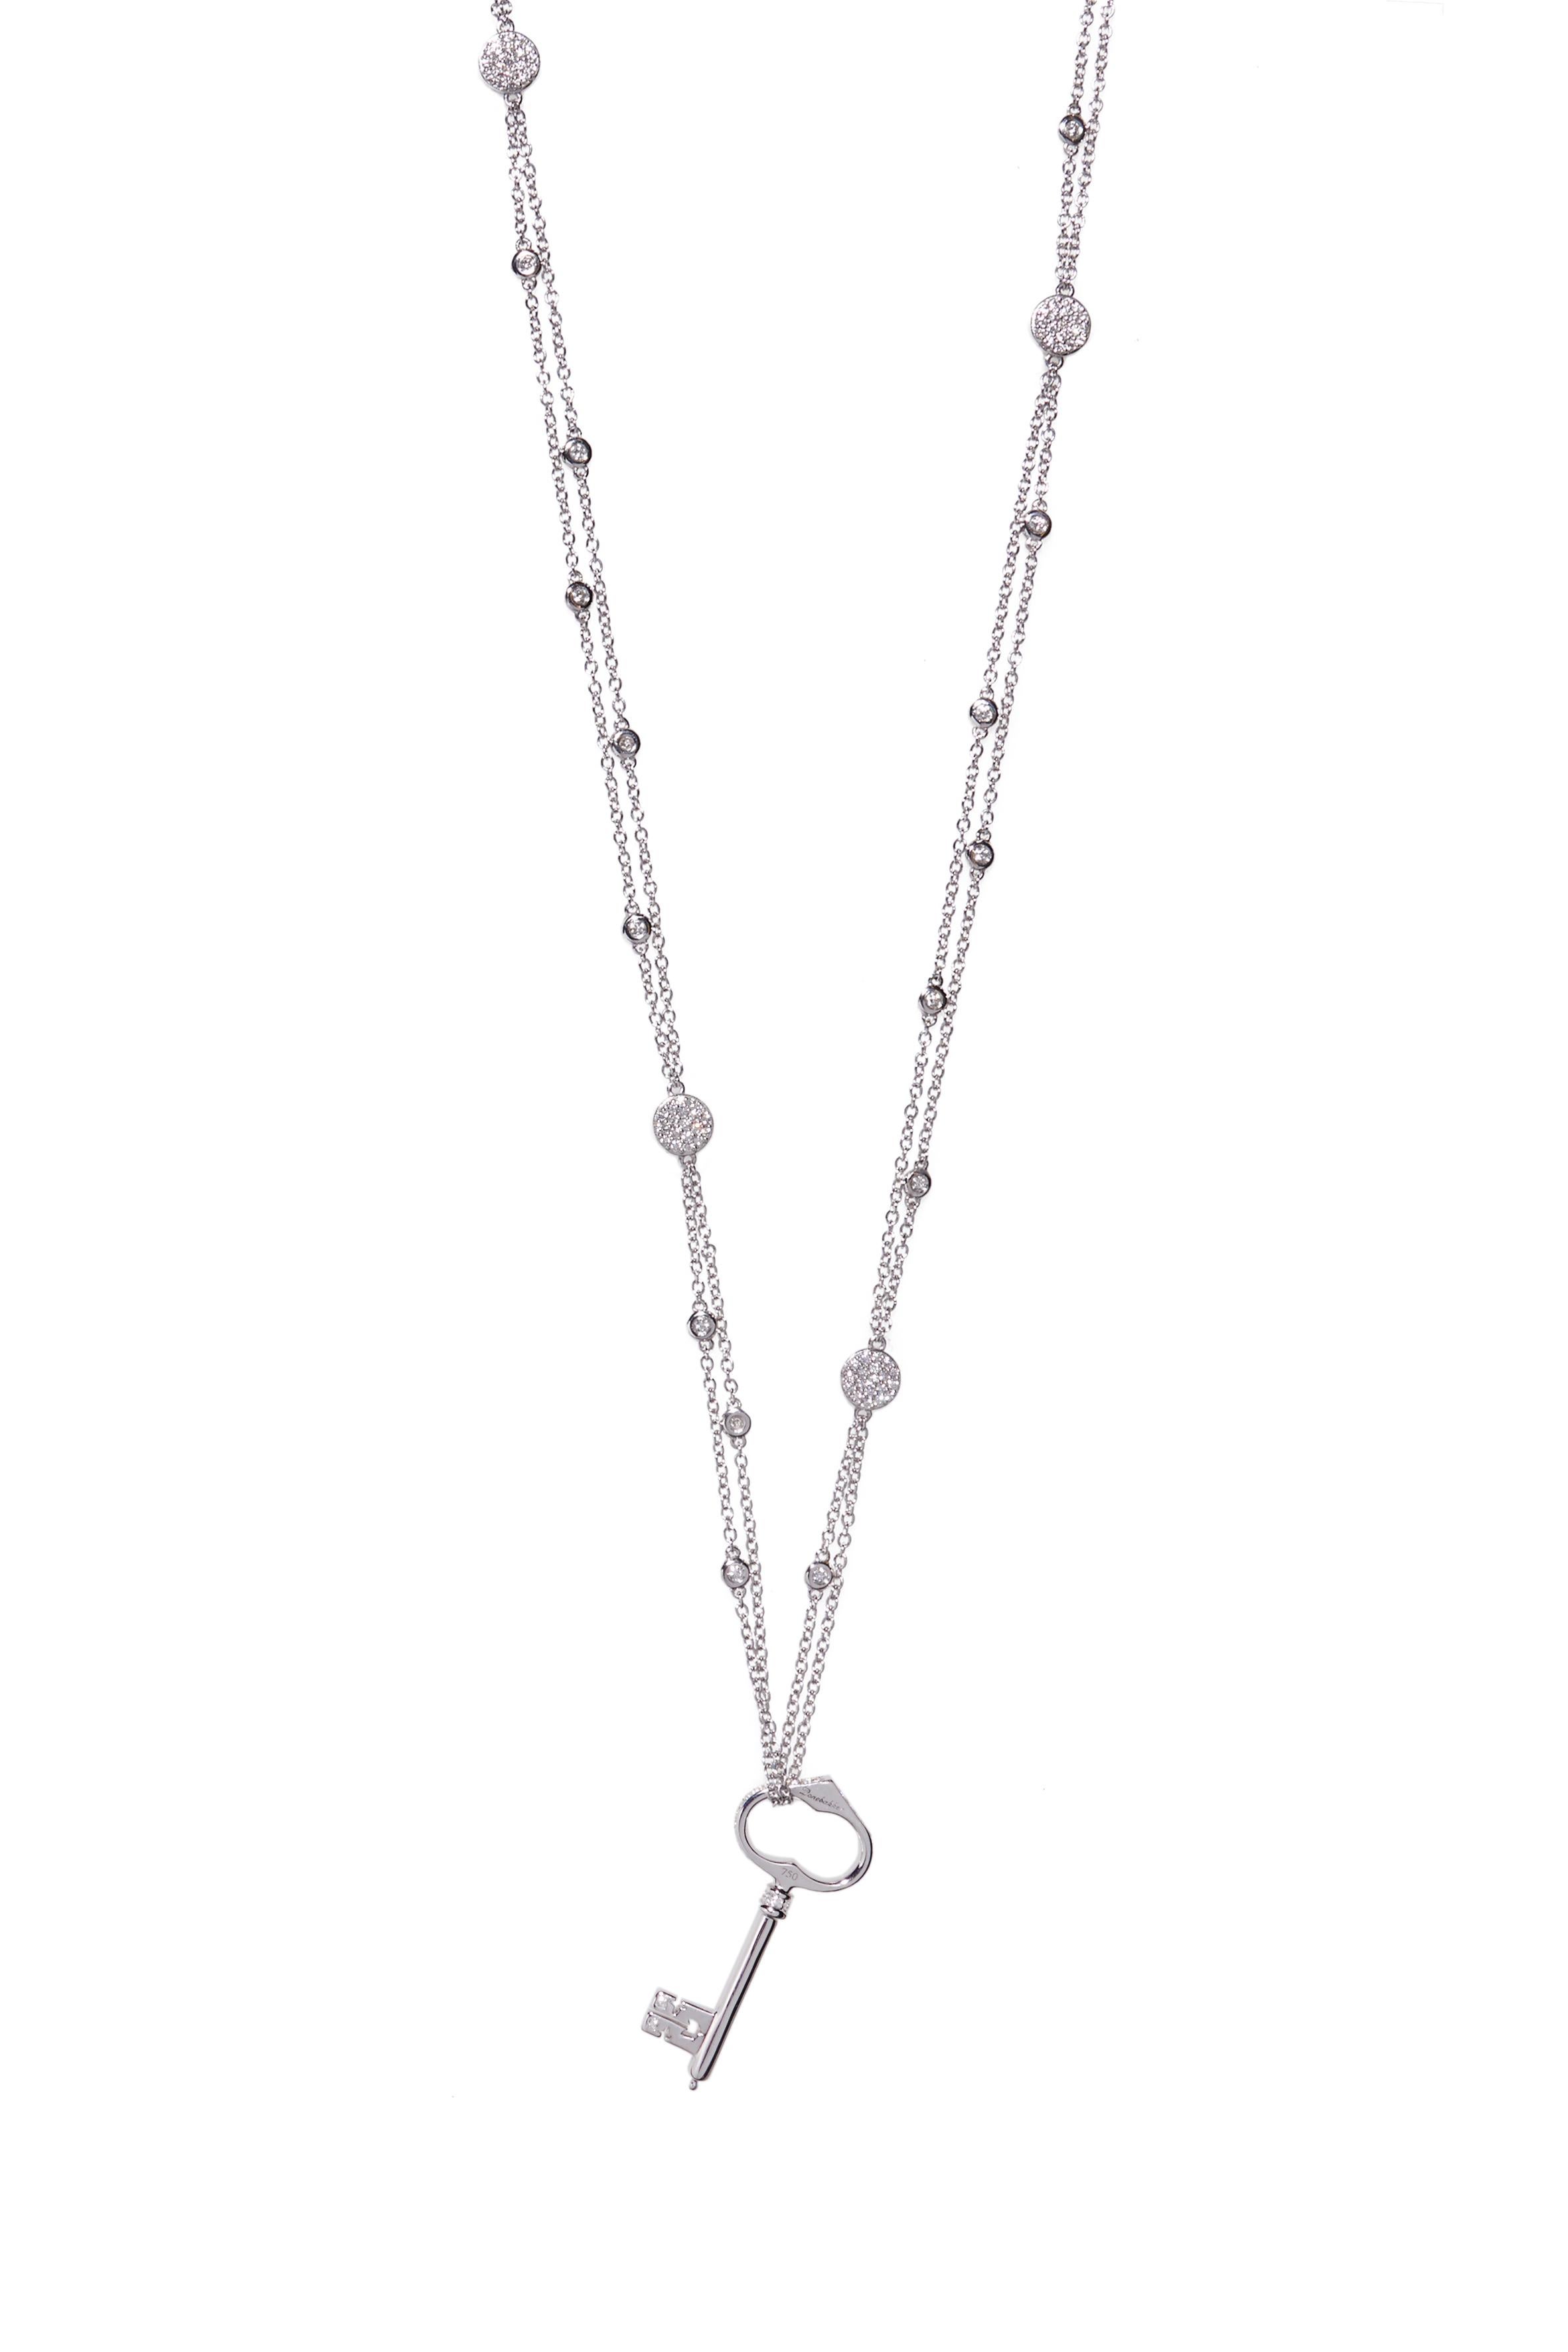 This 18 karat white gold necklace measures 79.5 cm (31.3 inch) which makes it perfect to wear as a sautoir or long necklace on its own as well as a sparkling base for a pendant, like our signature Key of Amsterdam.

Two chains are bezel set with